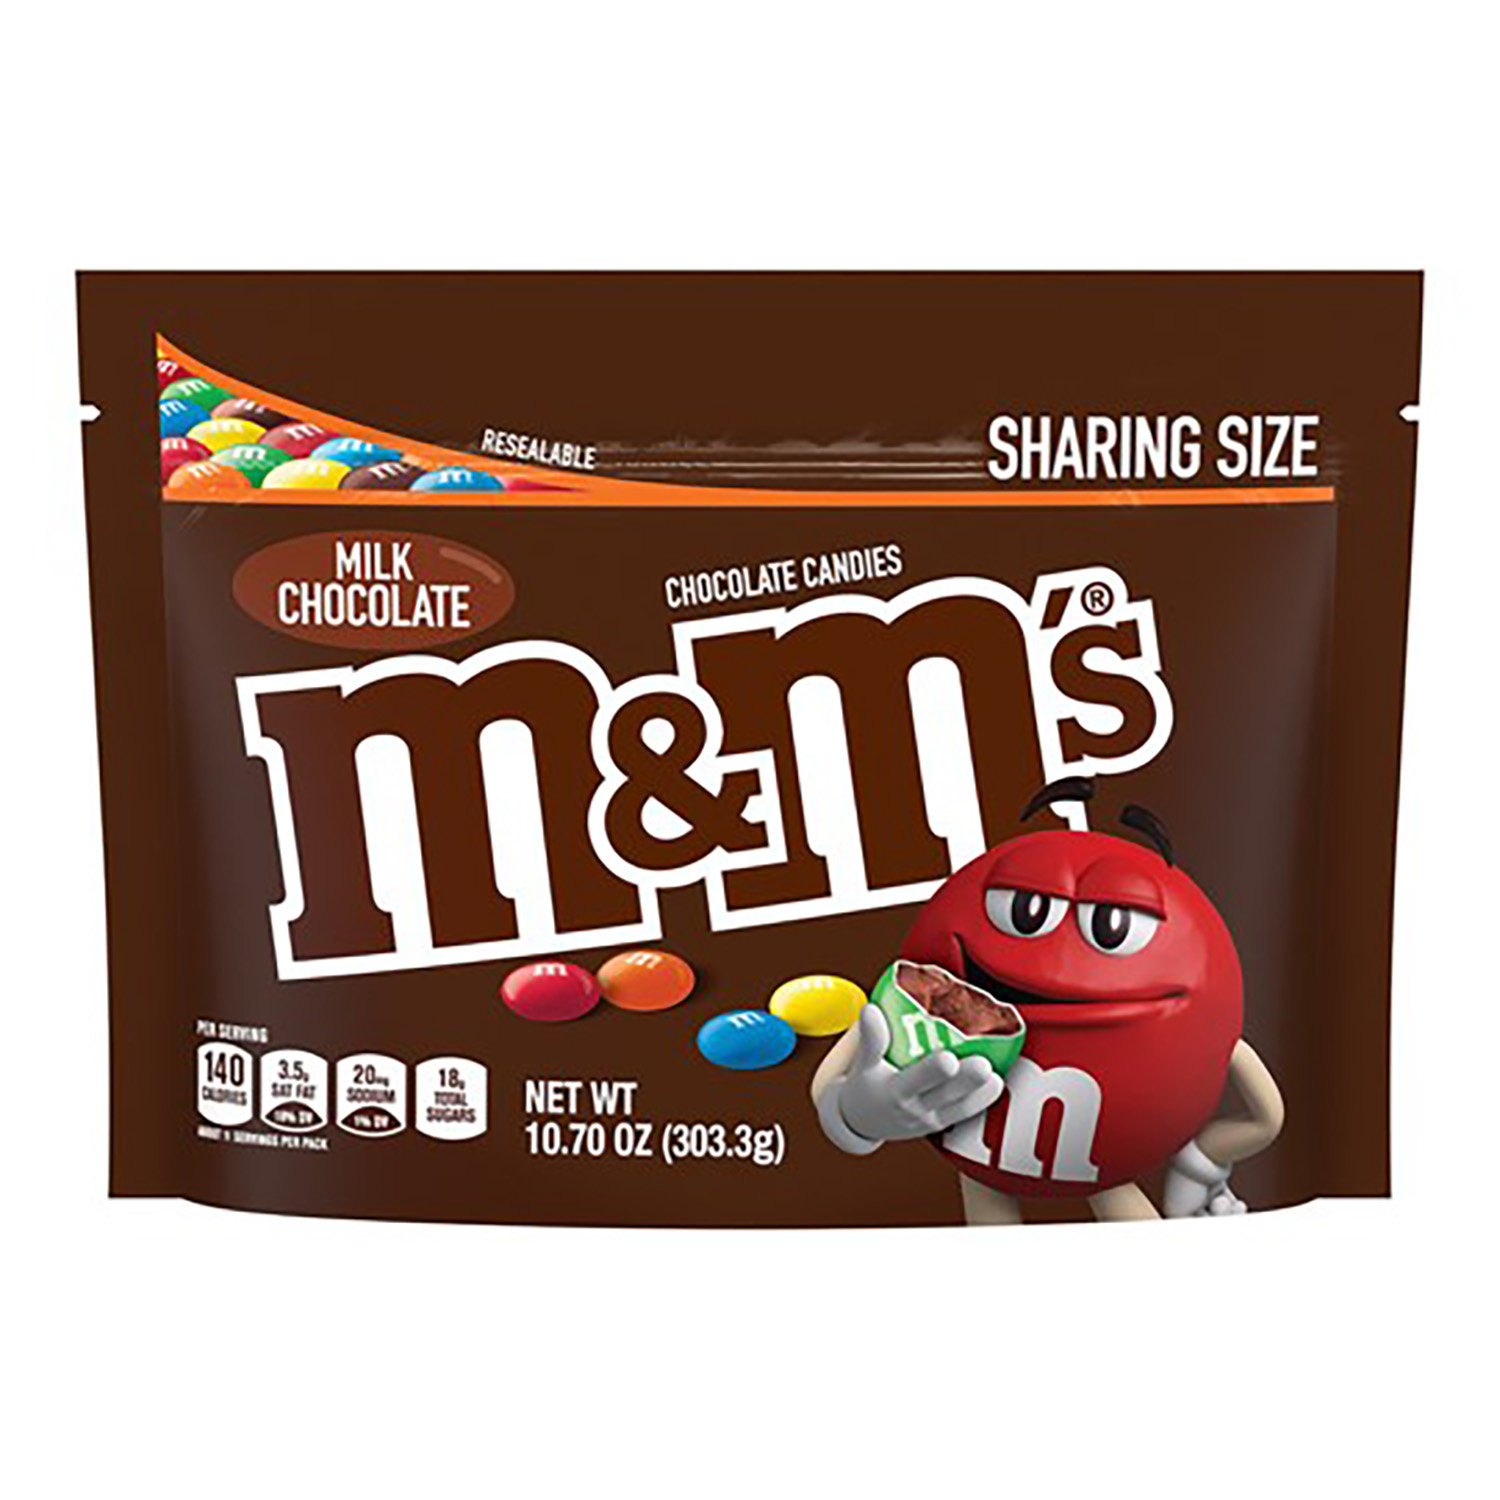 M&M'S Milk Chocolate Candy Sharing Size 3.14 oz. Pouch, 24/Box (MMM04431)